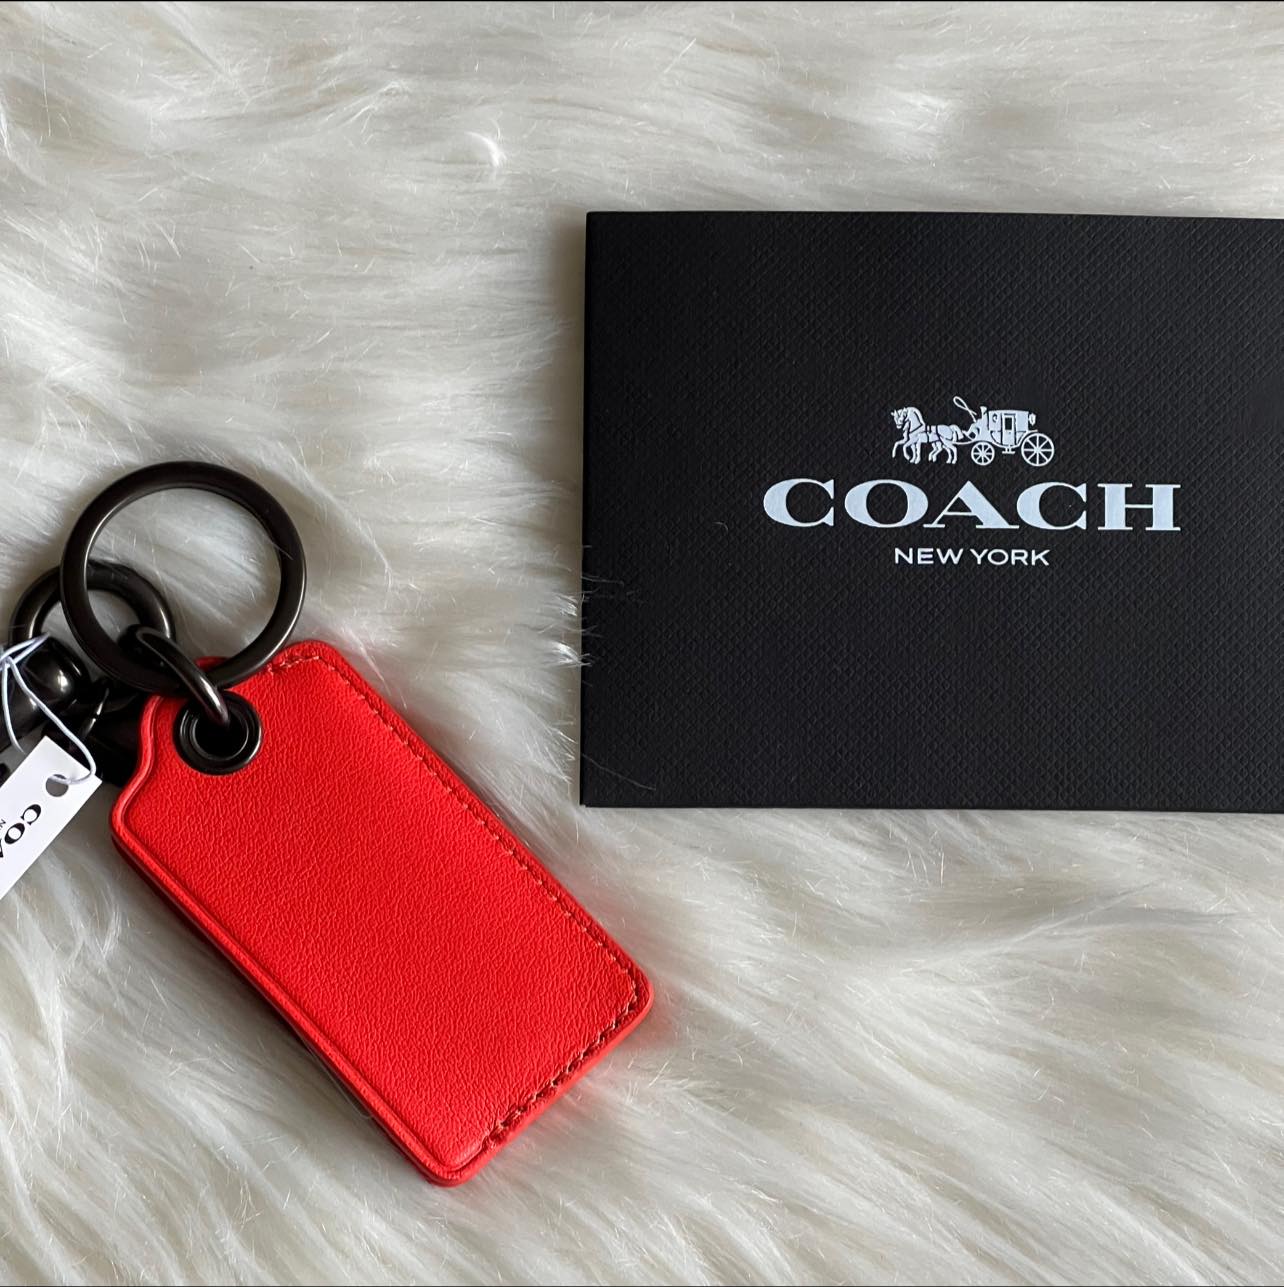 Coach 2021 SS Bottle Opener Key Fob with Coach Patch